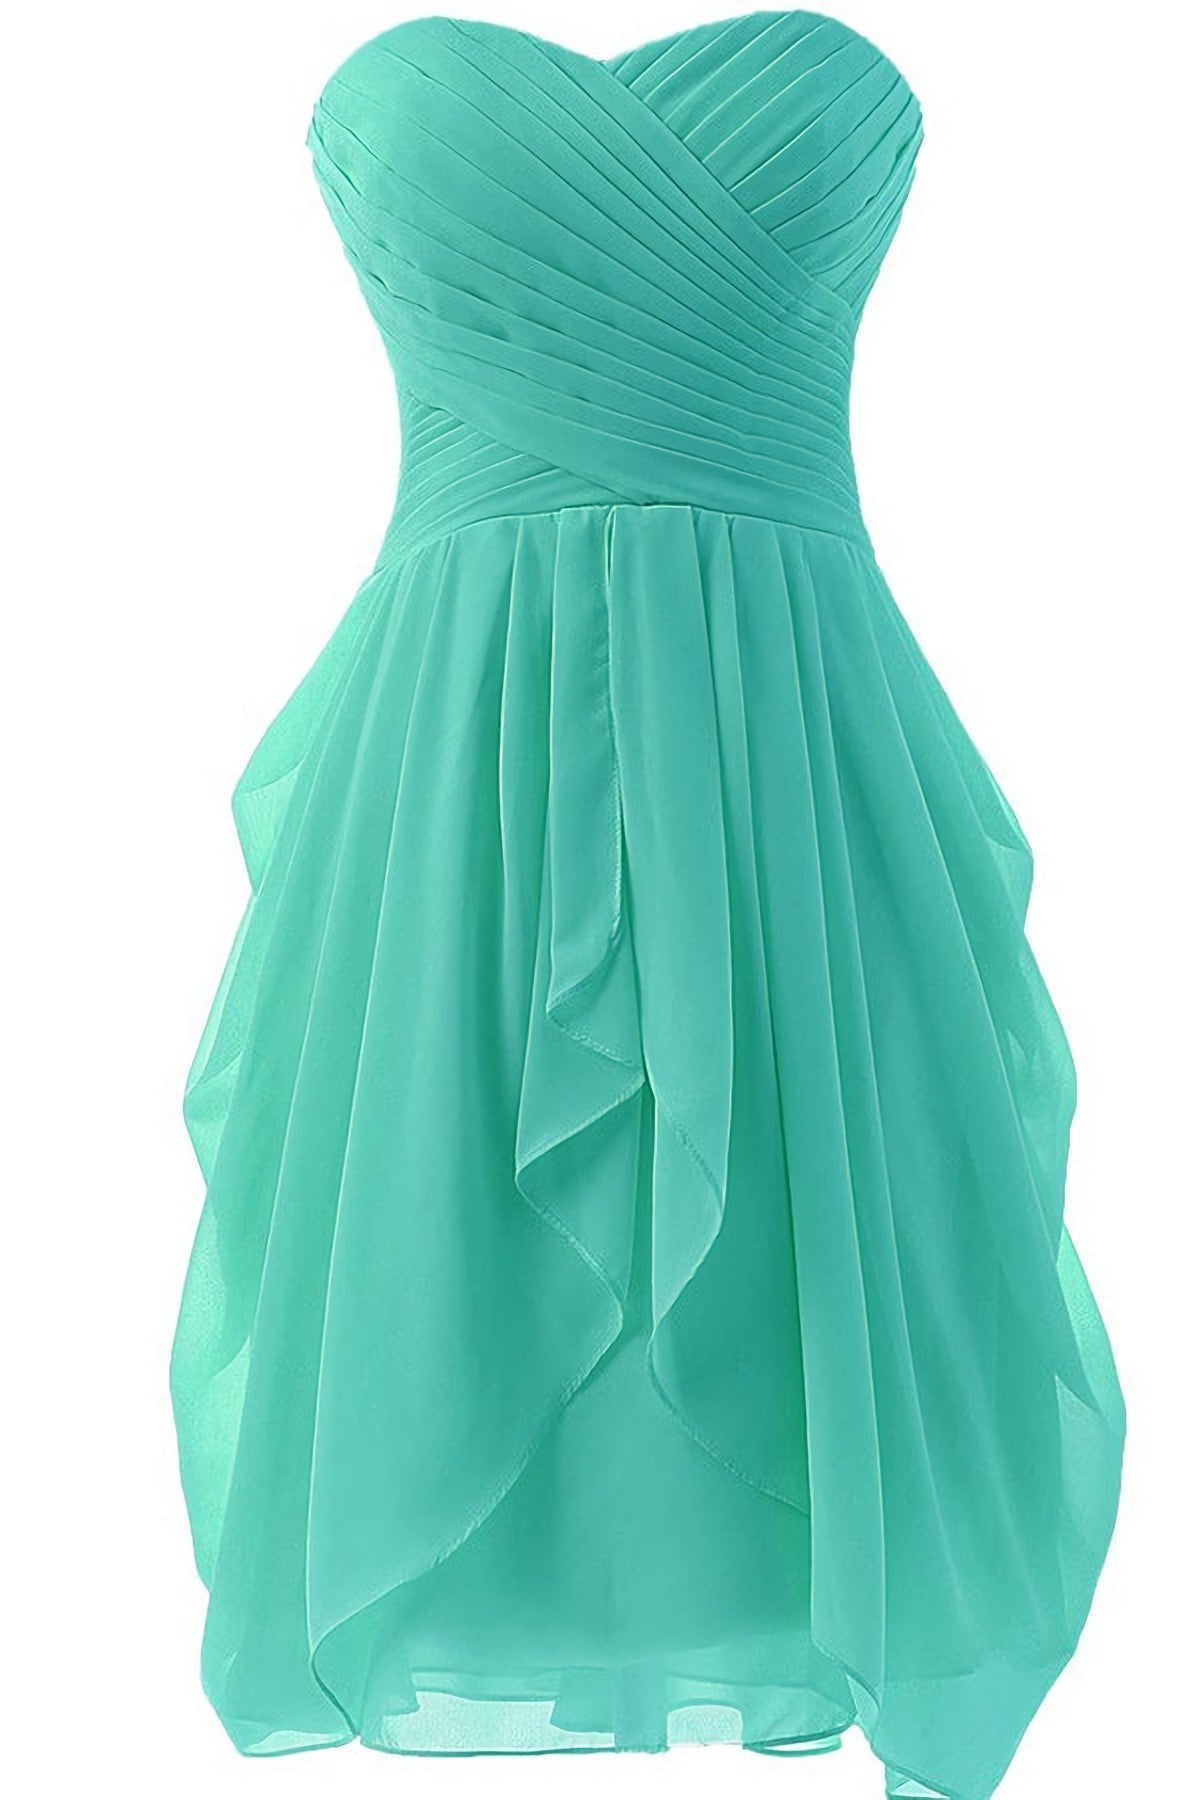 Mint A Line Sweetheart Ruffles Short Front High Low Short Corset Prom Dresses outfit, Wedding Dresses Tops